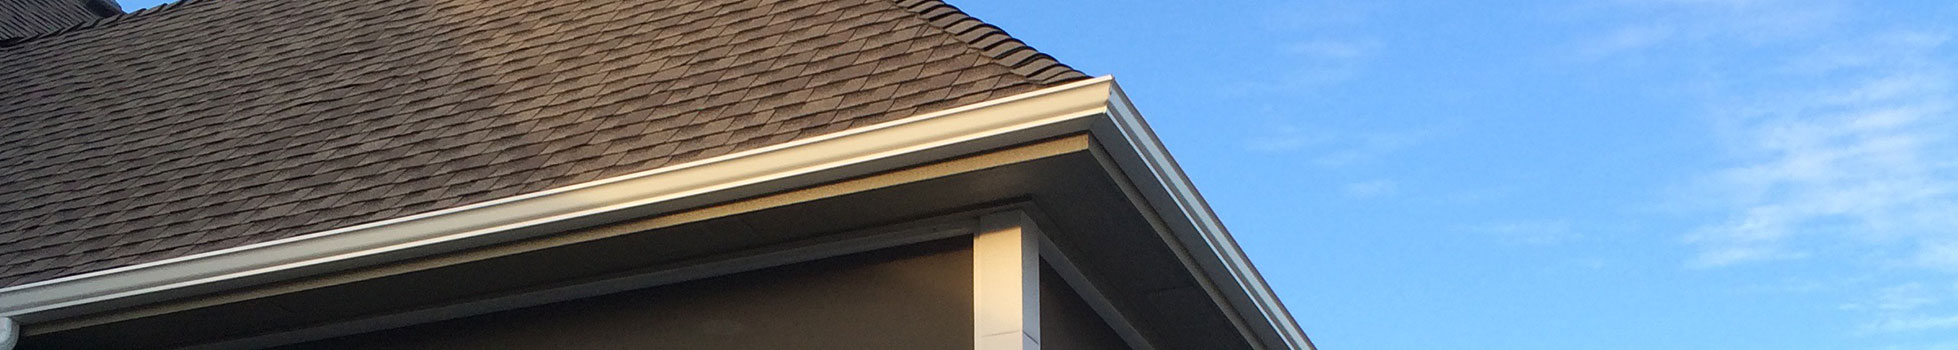 Is there a downside to gutter guards?